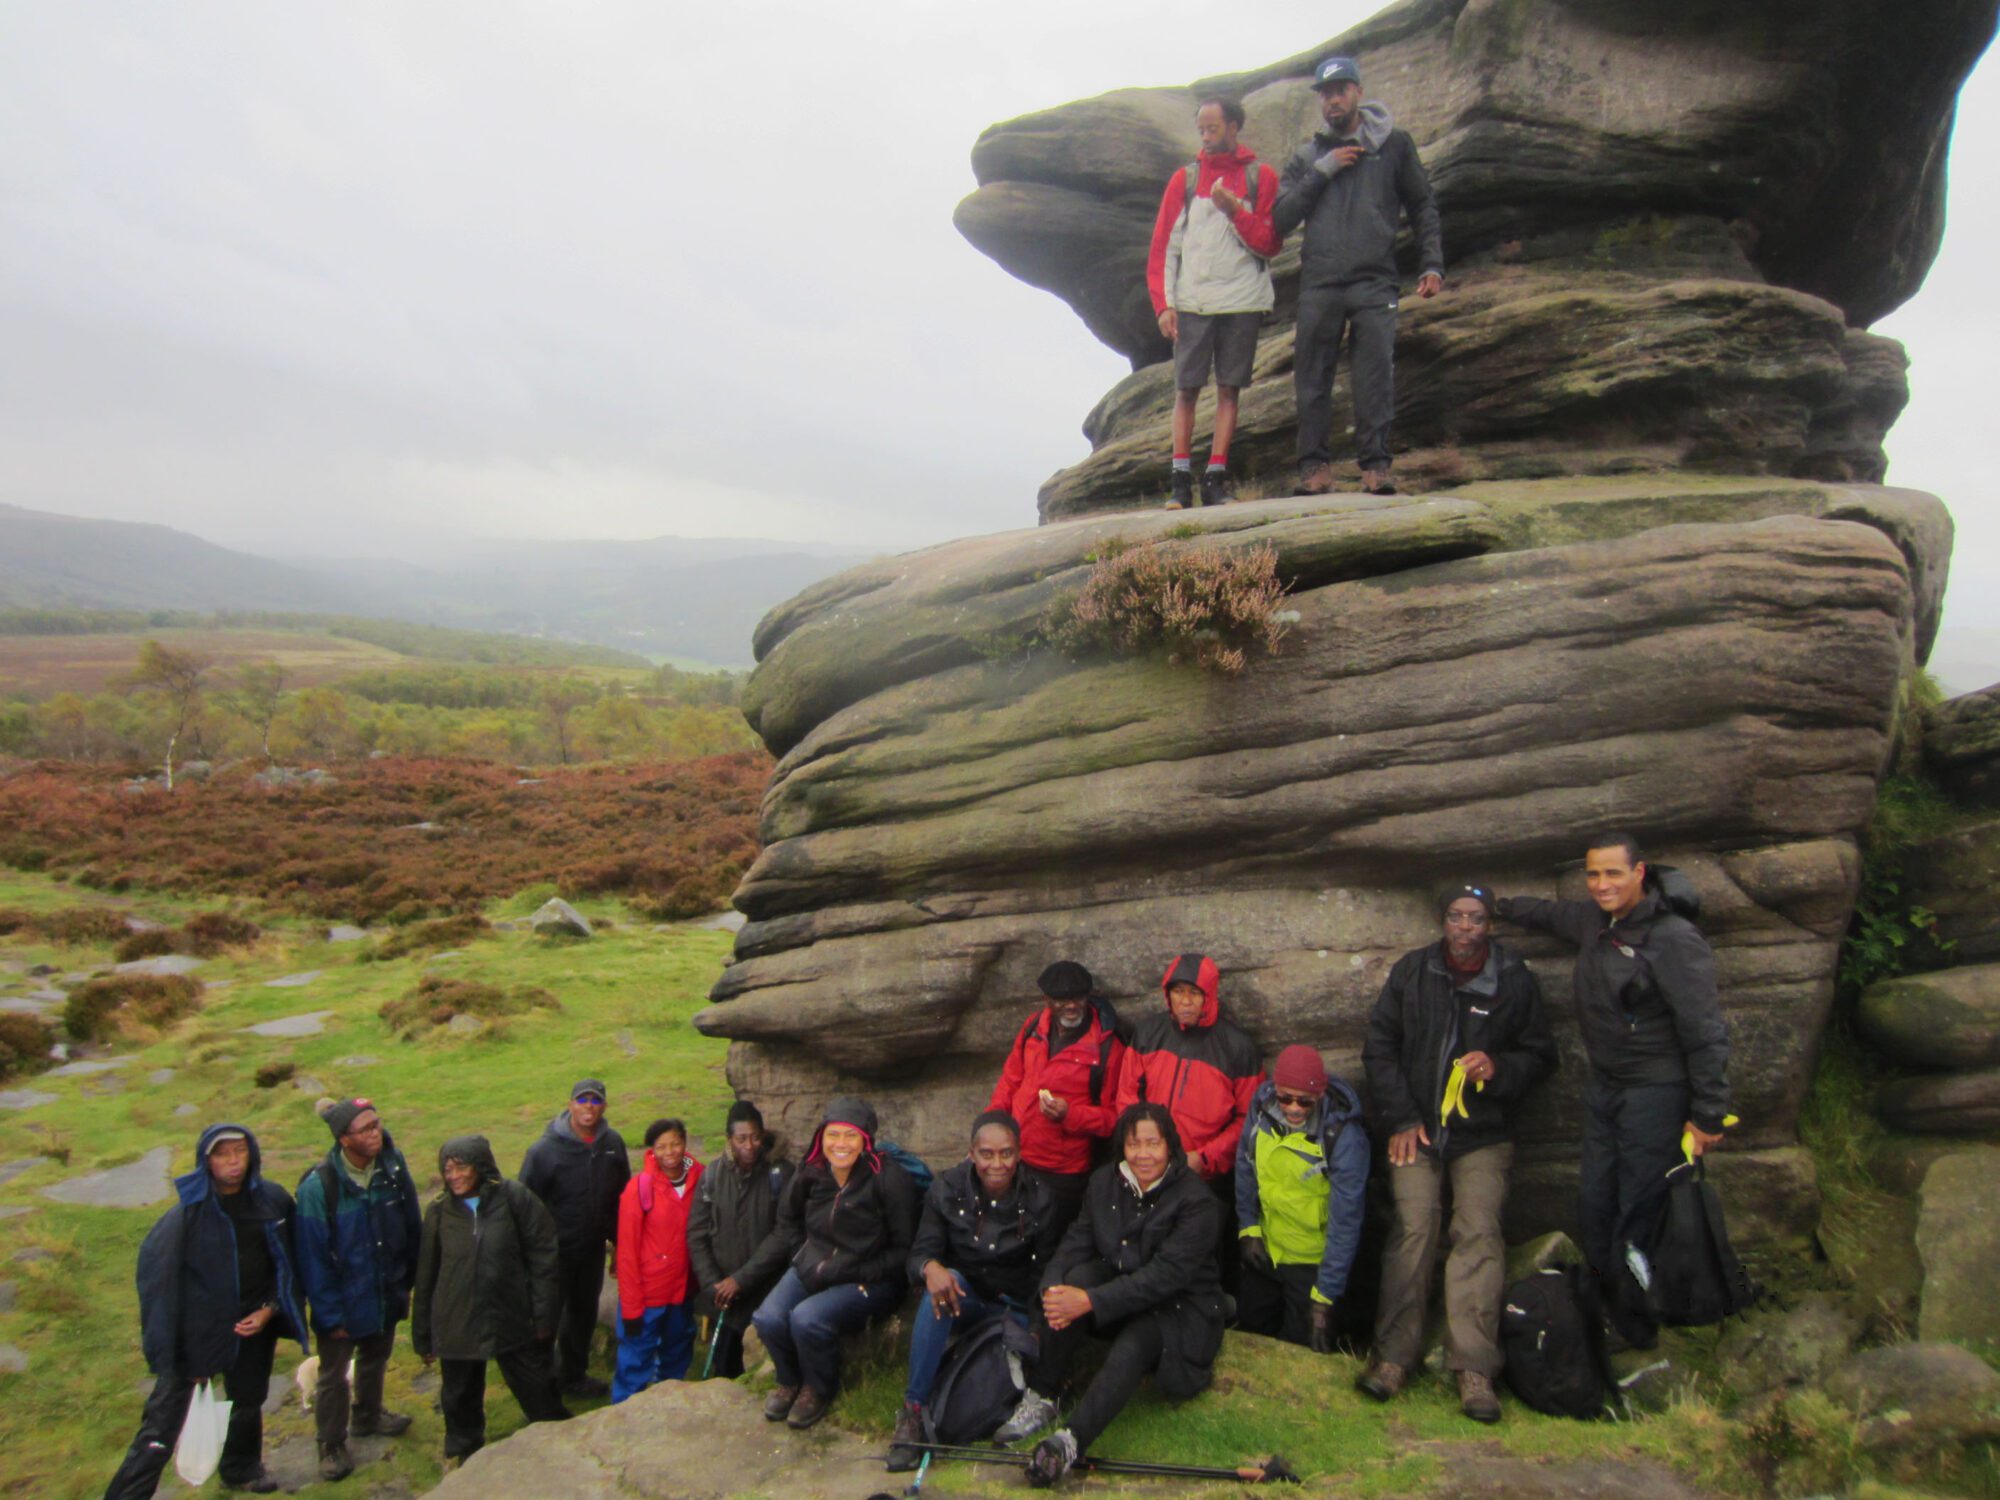 100 Black men walking group standing by a large rock in the UK countryside